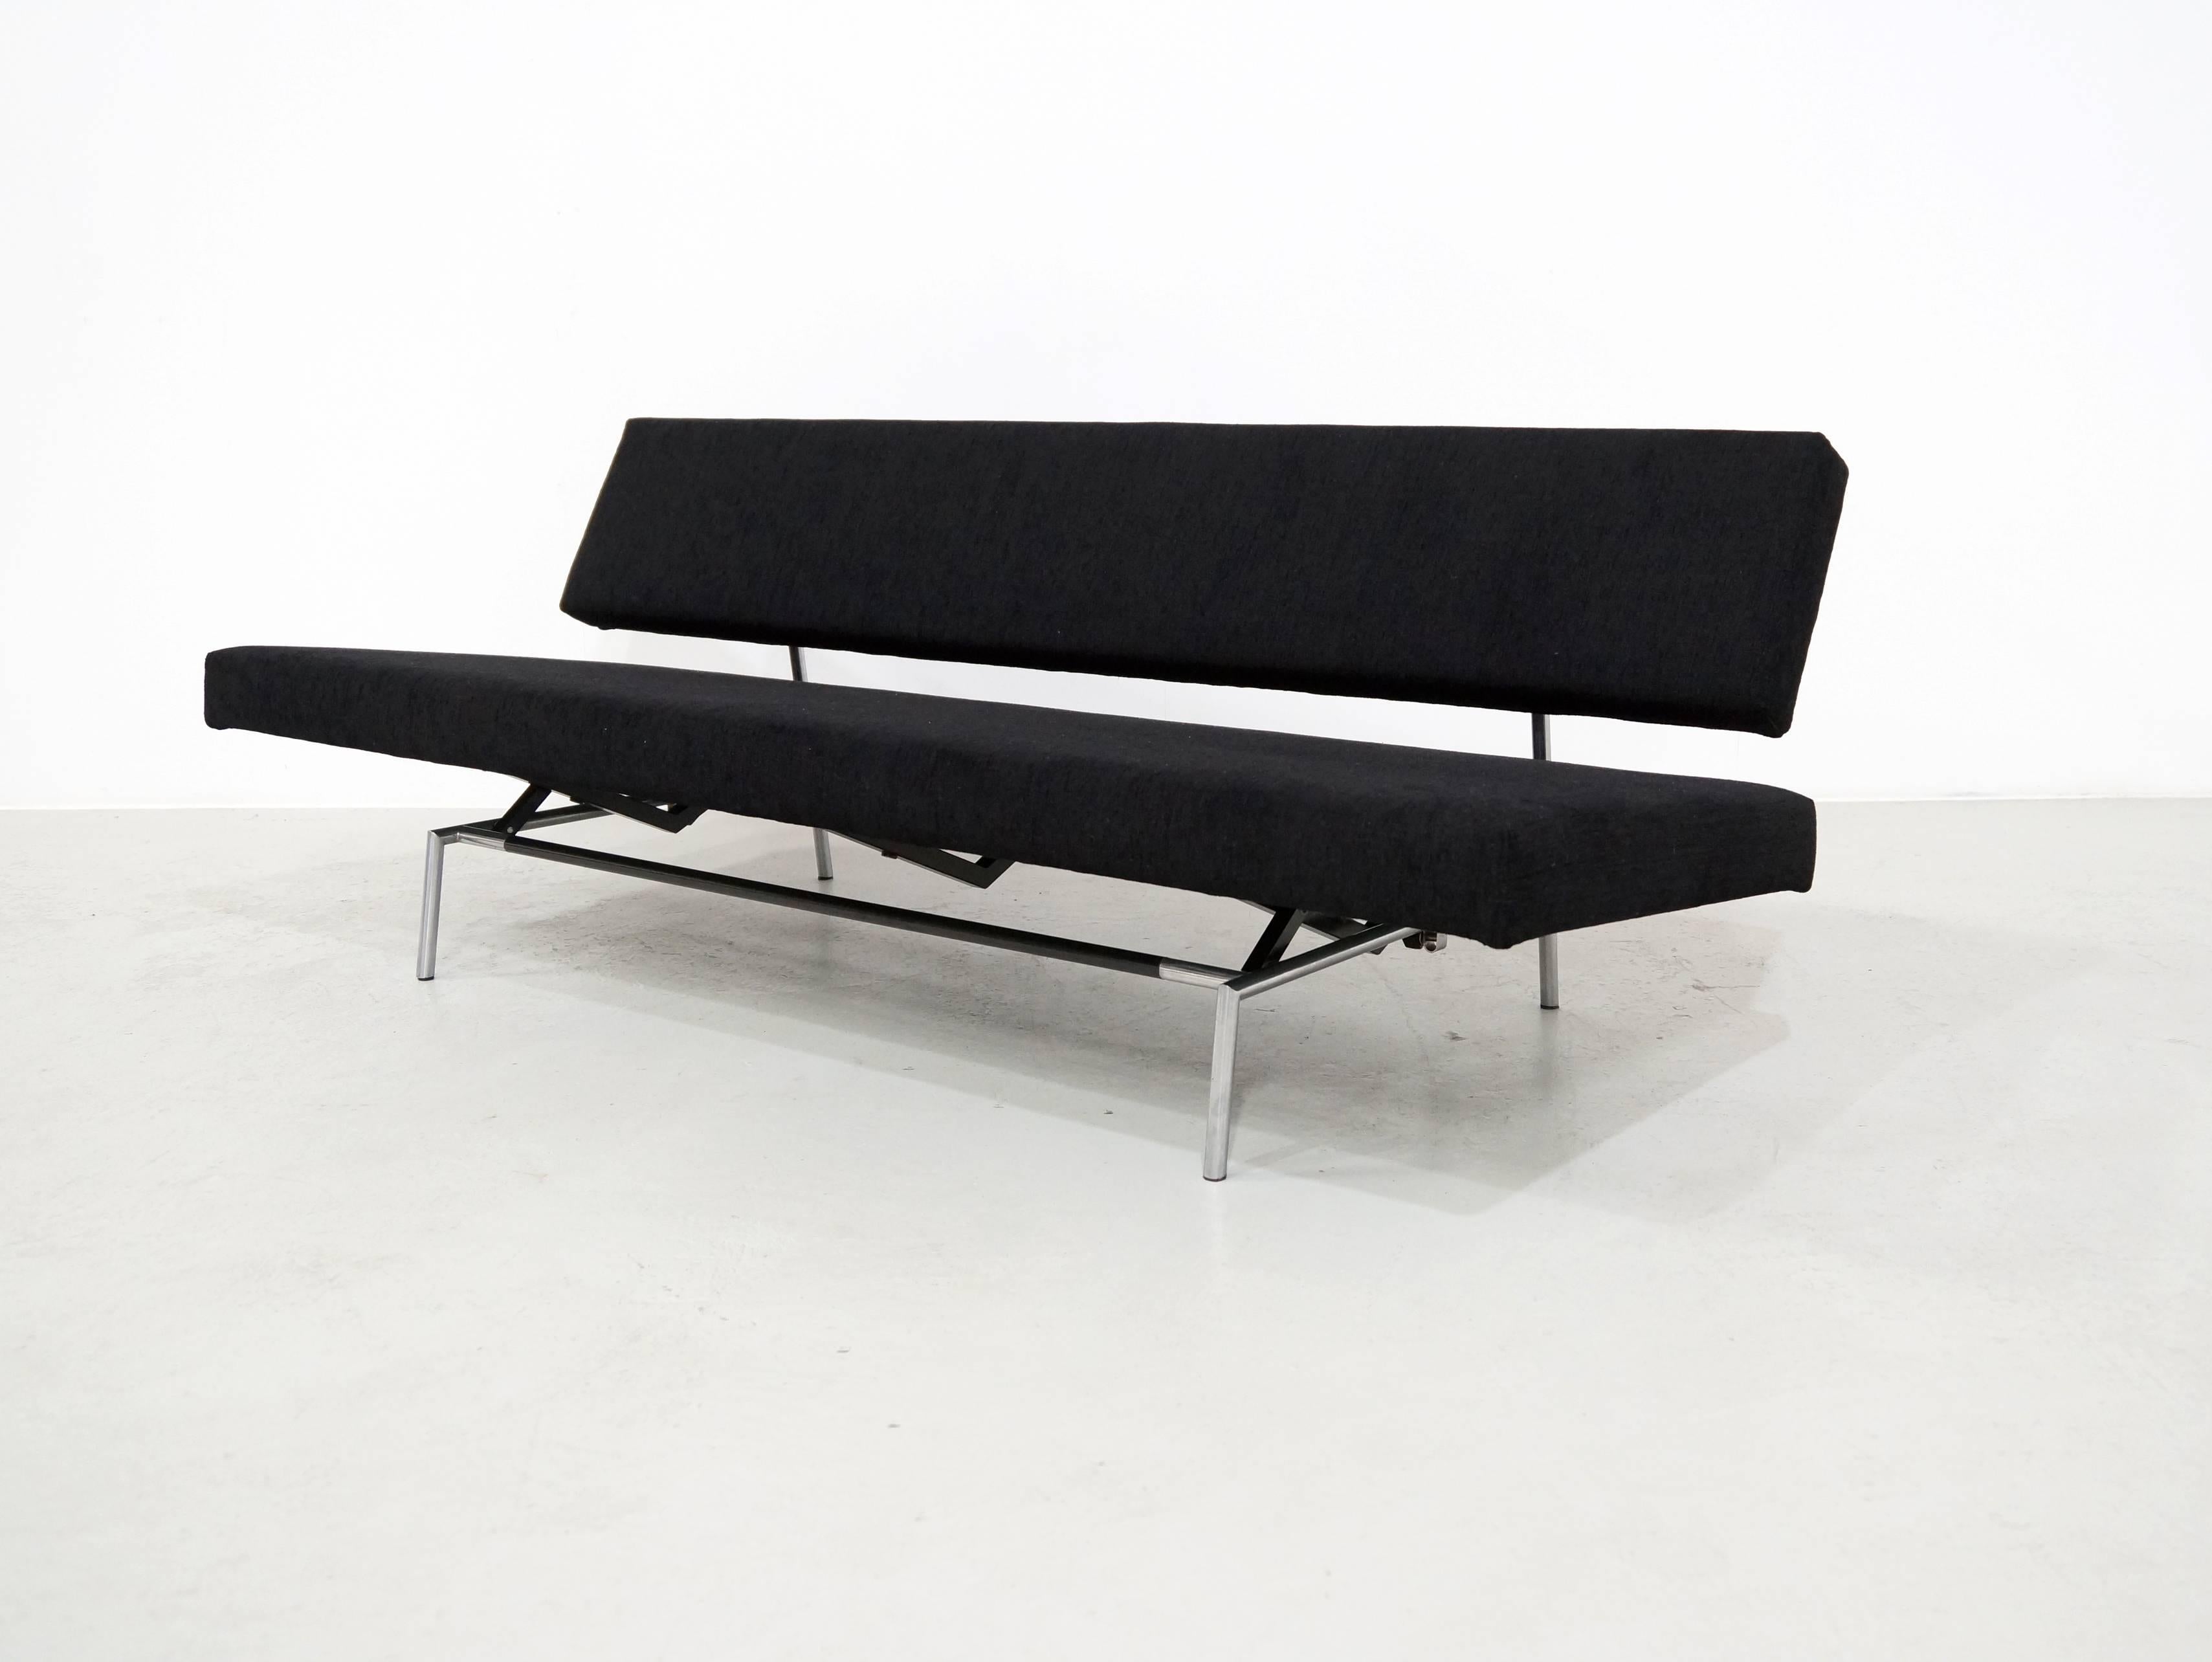 Black and Stainless Steel Daybed, Sofa by Martin Visser for Spectrum, 1958 In Good Condition In 's Heer Arendskerke, NL